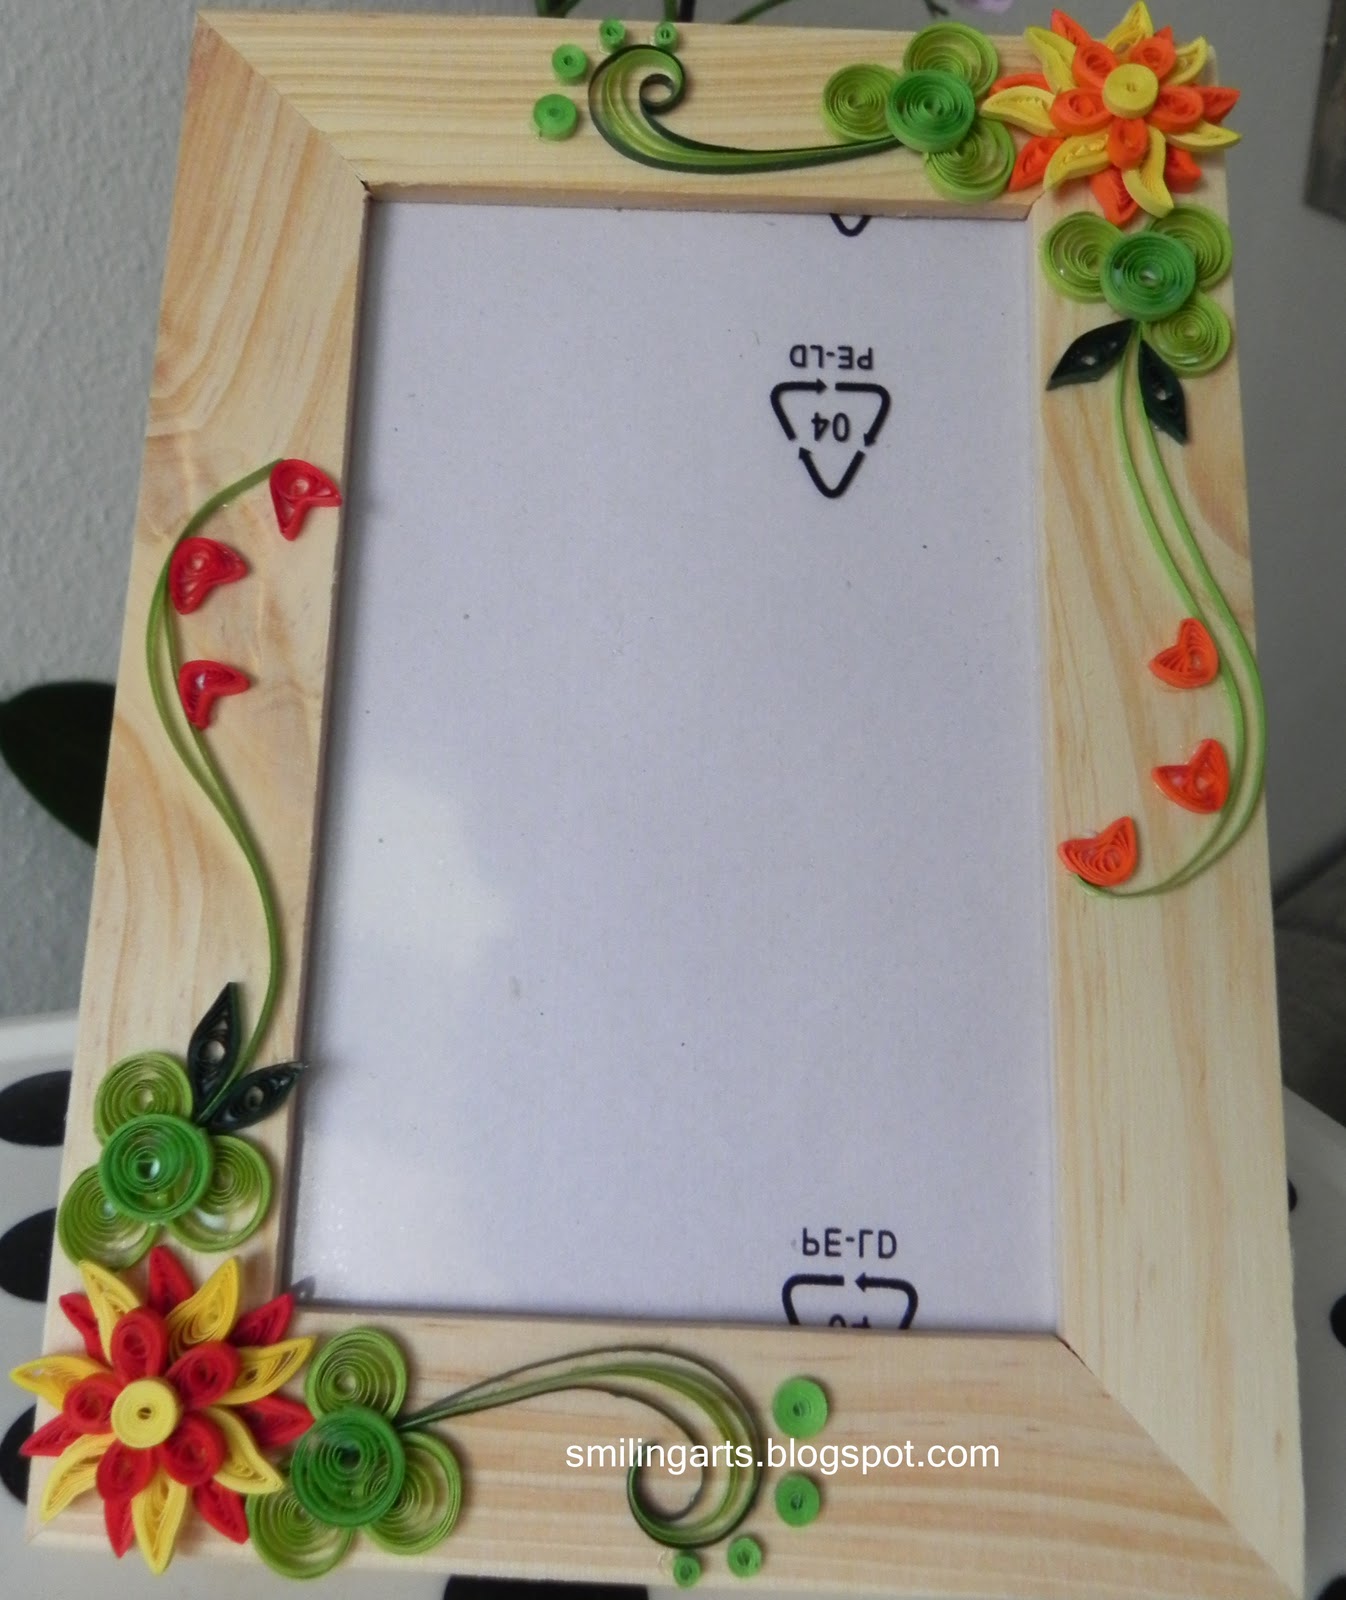 Smilingarts: Frame with quilled design - Frame with quilled design